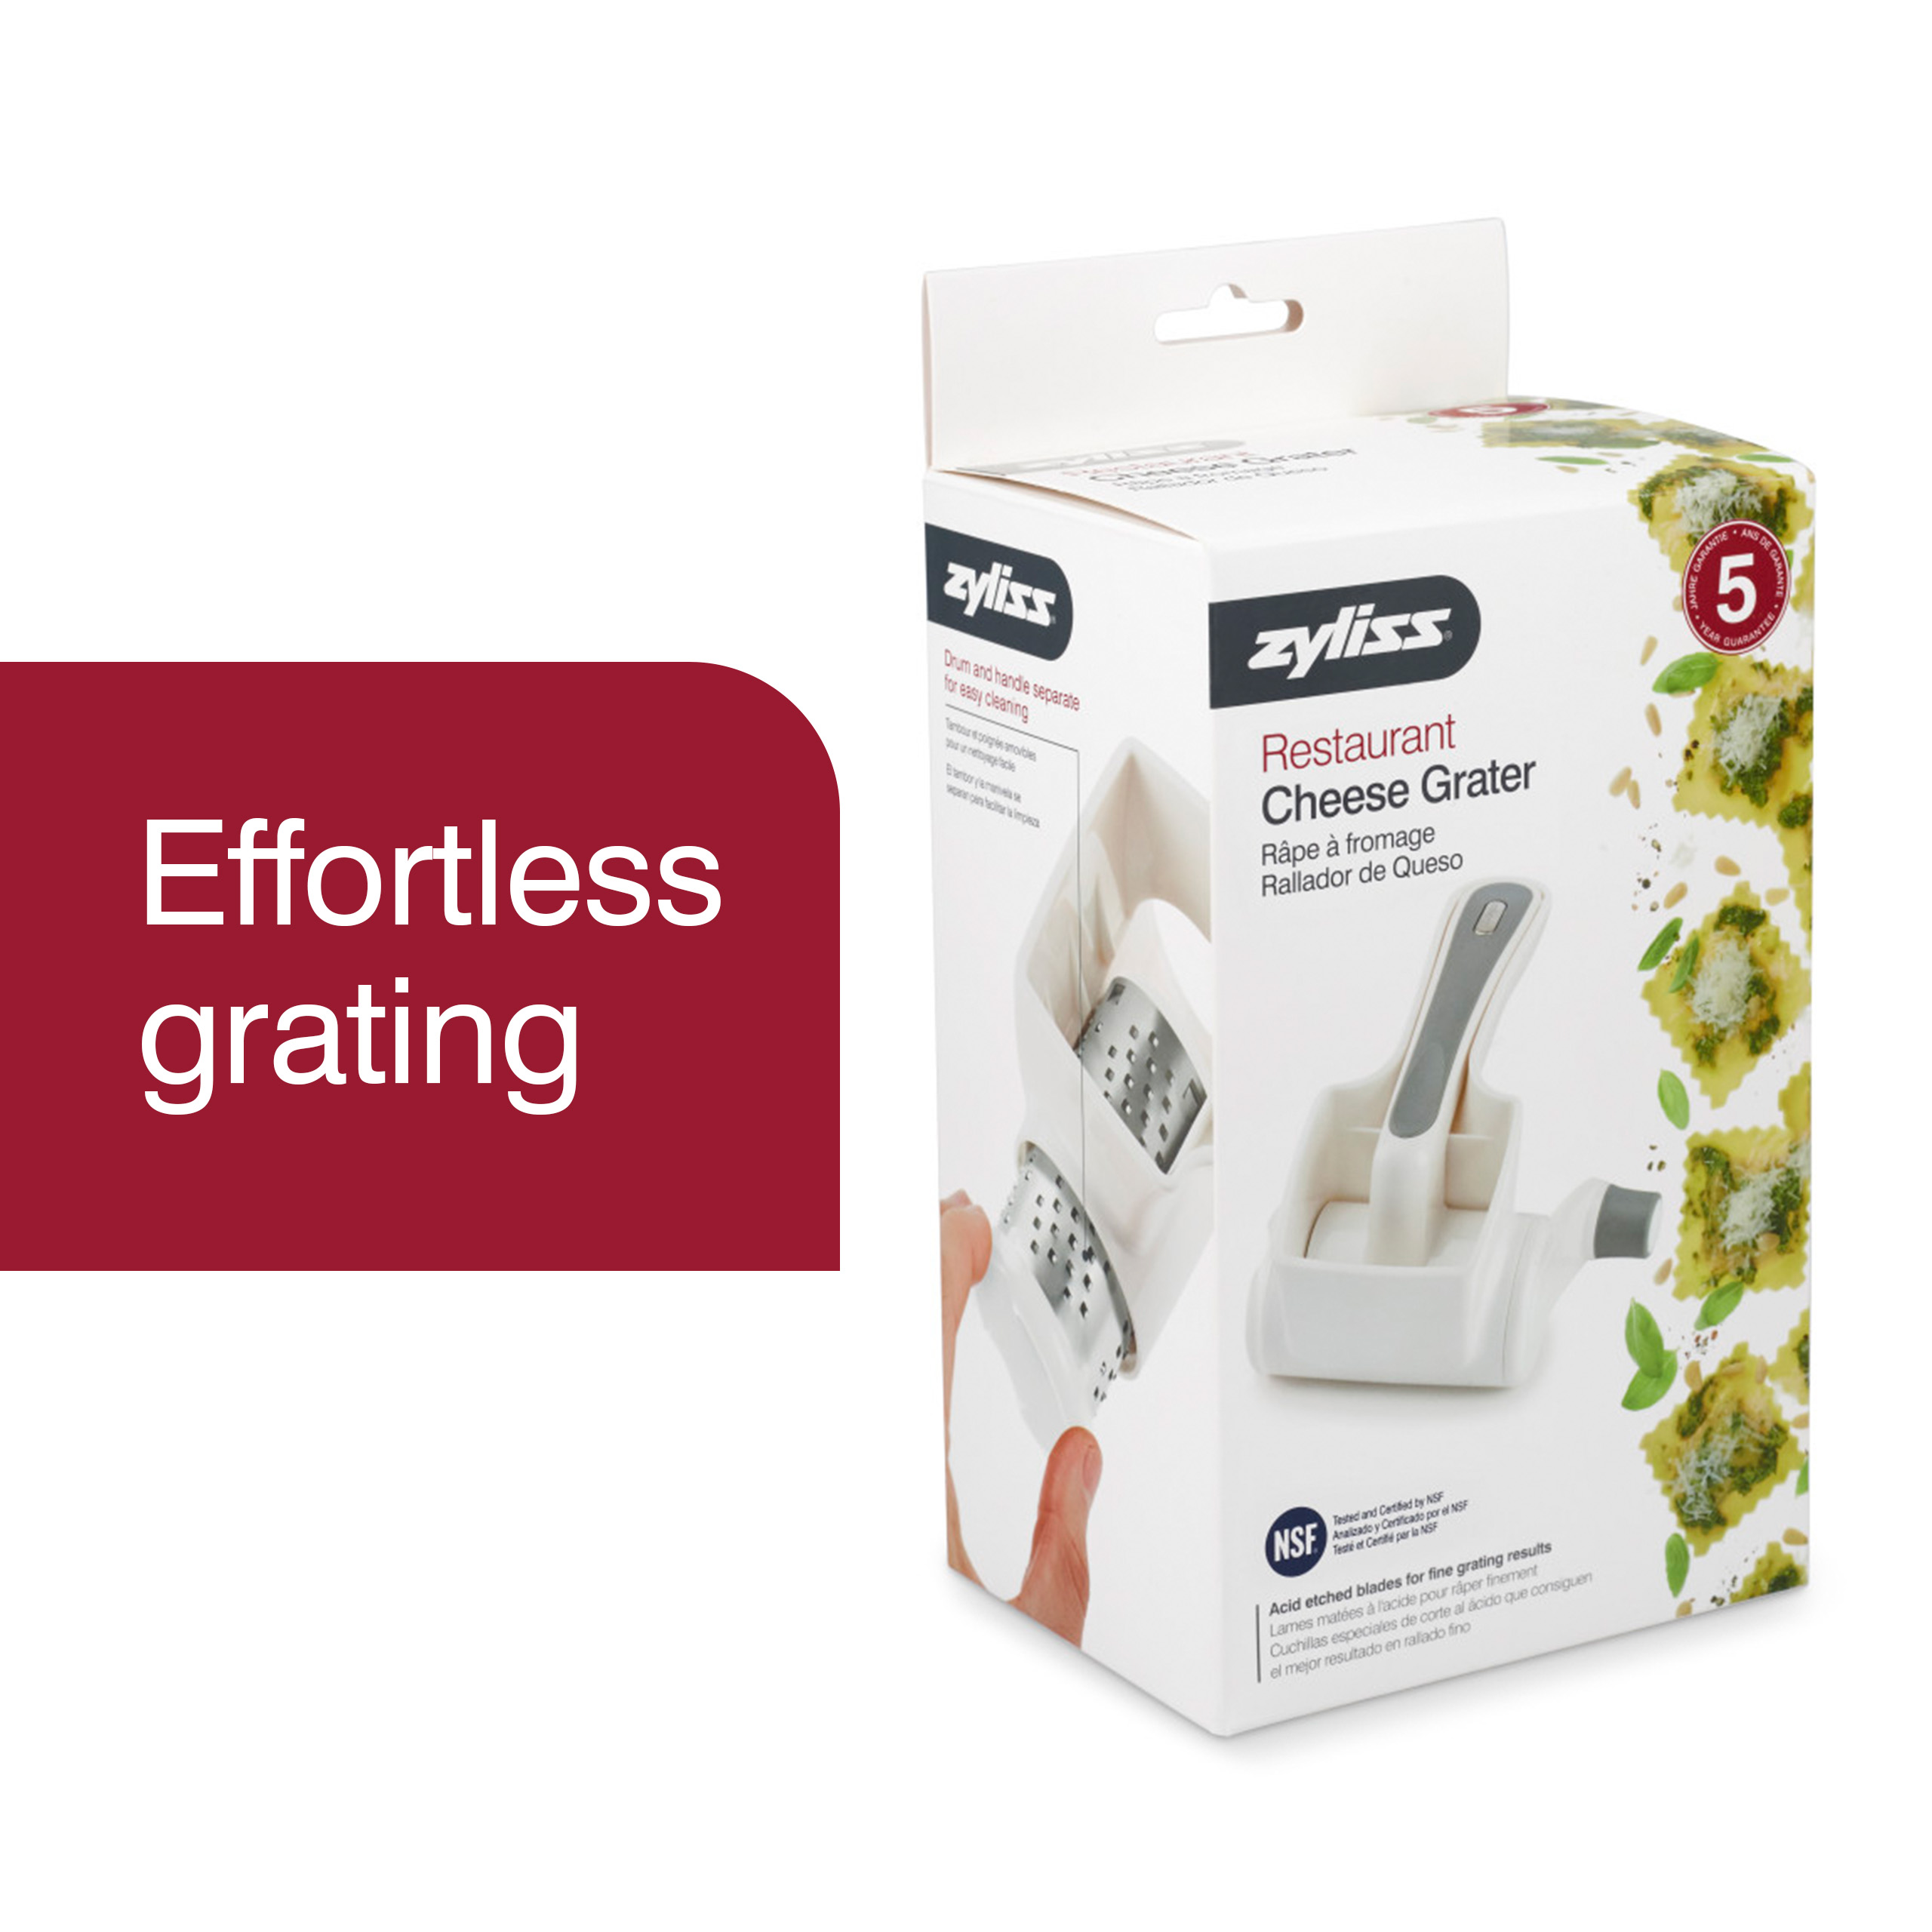 Frieling Handheld Rotary Cheese Grater, Stainless Steel on Food52